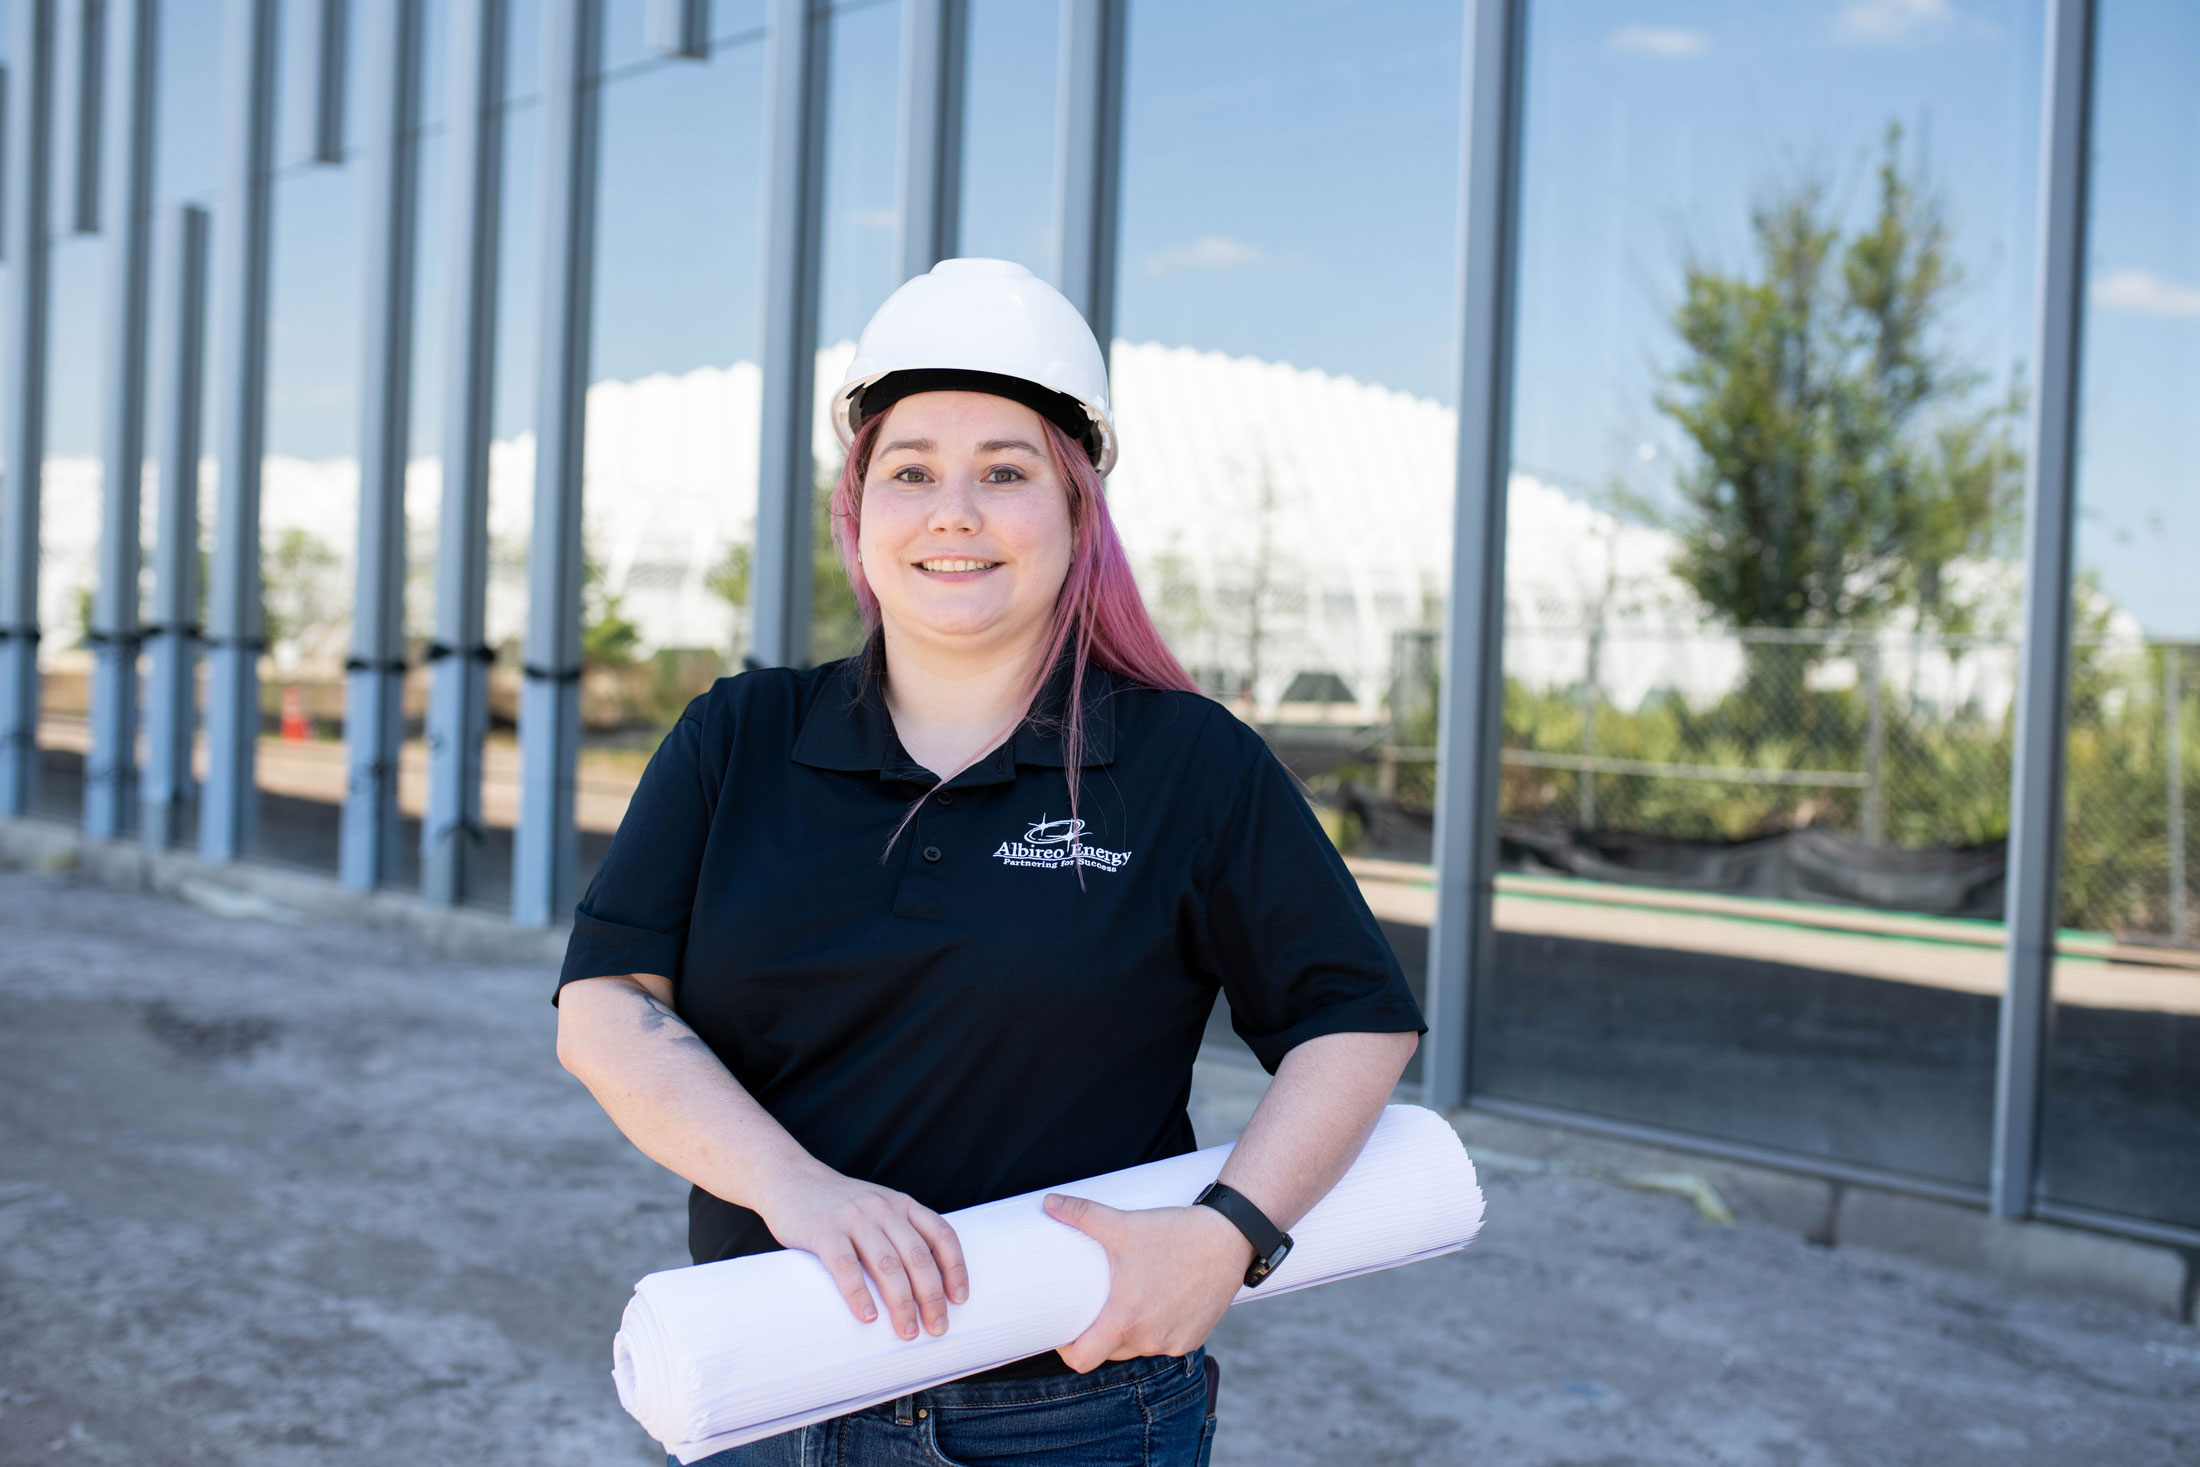 Mechanical engineering alumna Mehgan O’Connor is a project engineer working on the Applied Research Center.